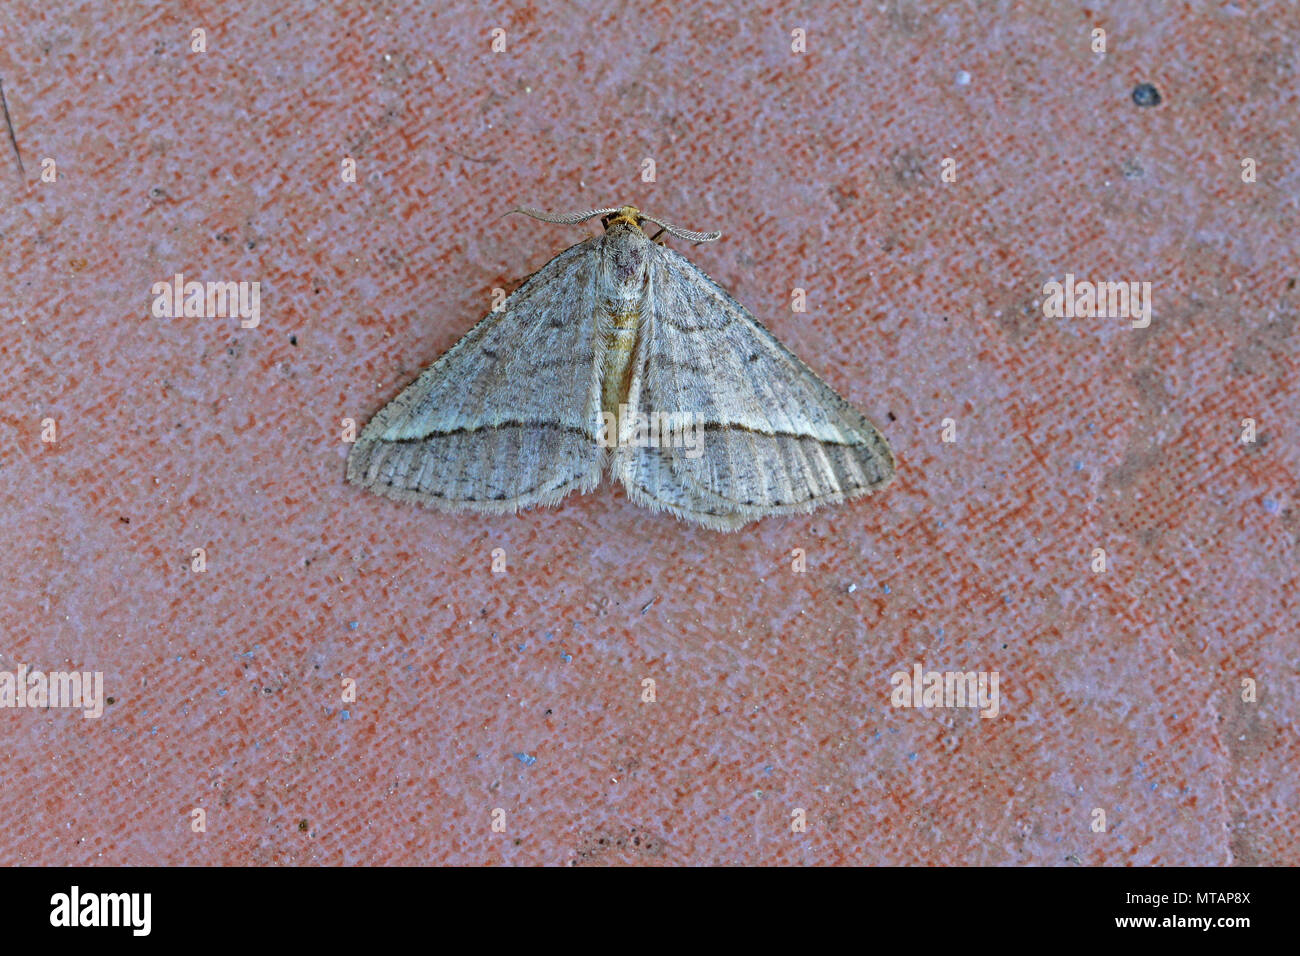 small white or silver fan foot moth herminia nemoralis or grisealis not tarsipennalis one of the noctuid or owlet moths at rest on a tile in Italy Stock Photo